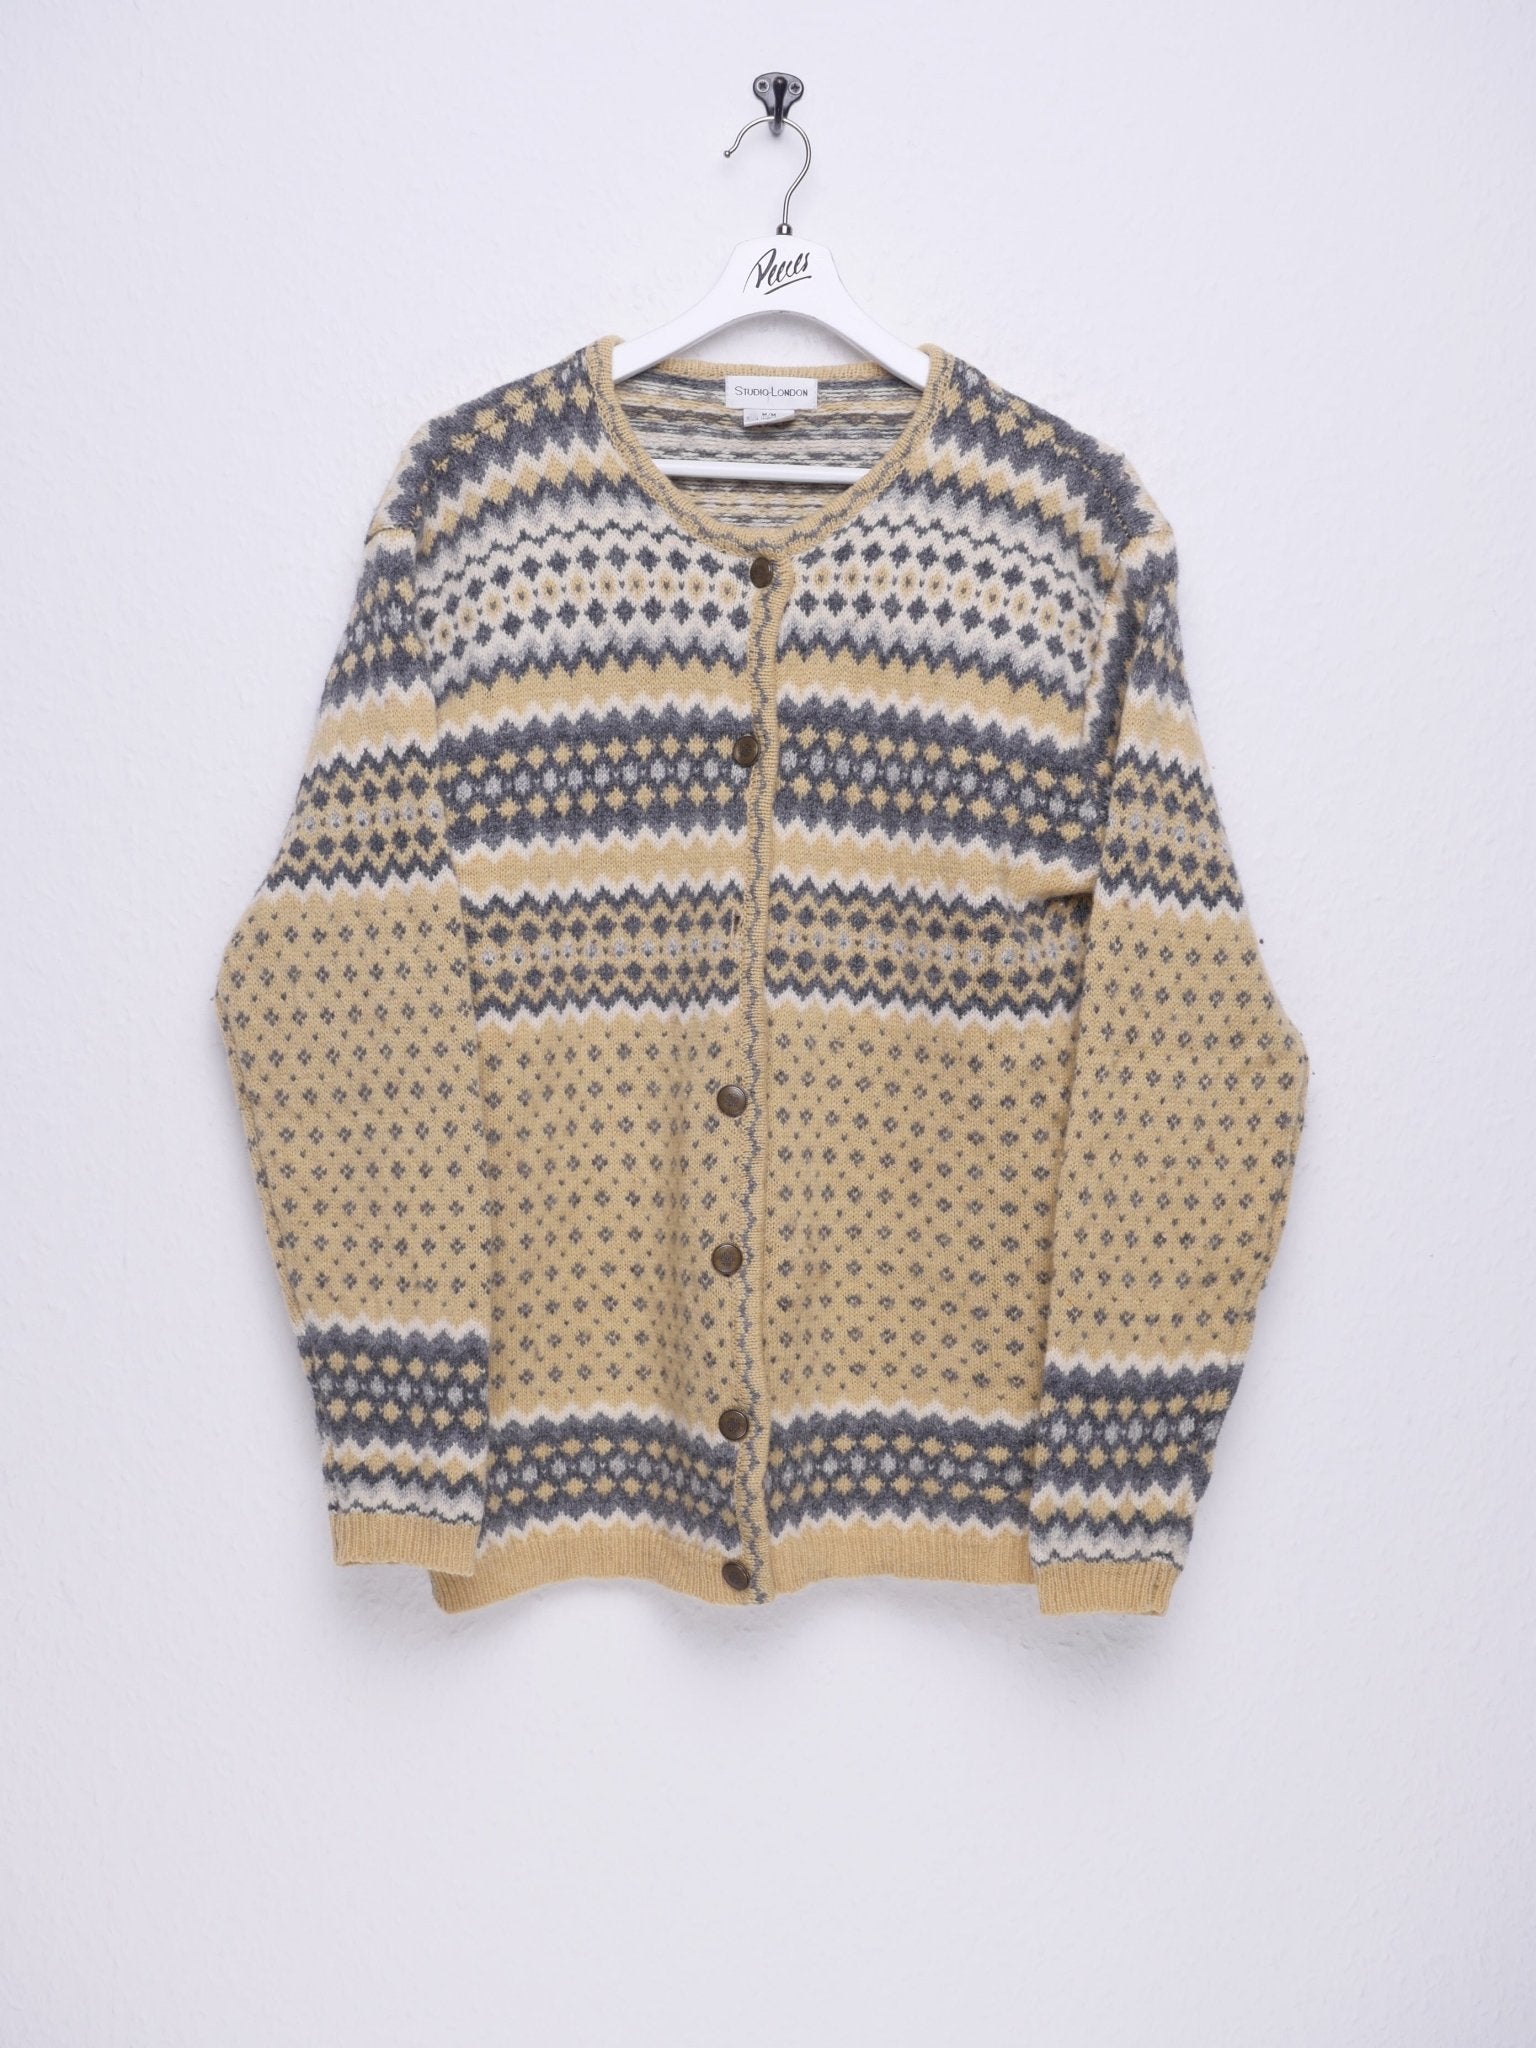 knitted patterned wool Cardigan Sweater - Peeces